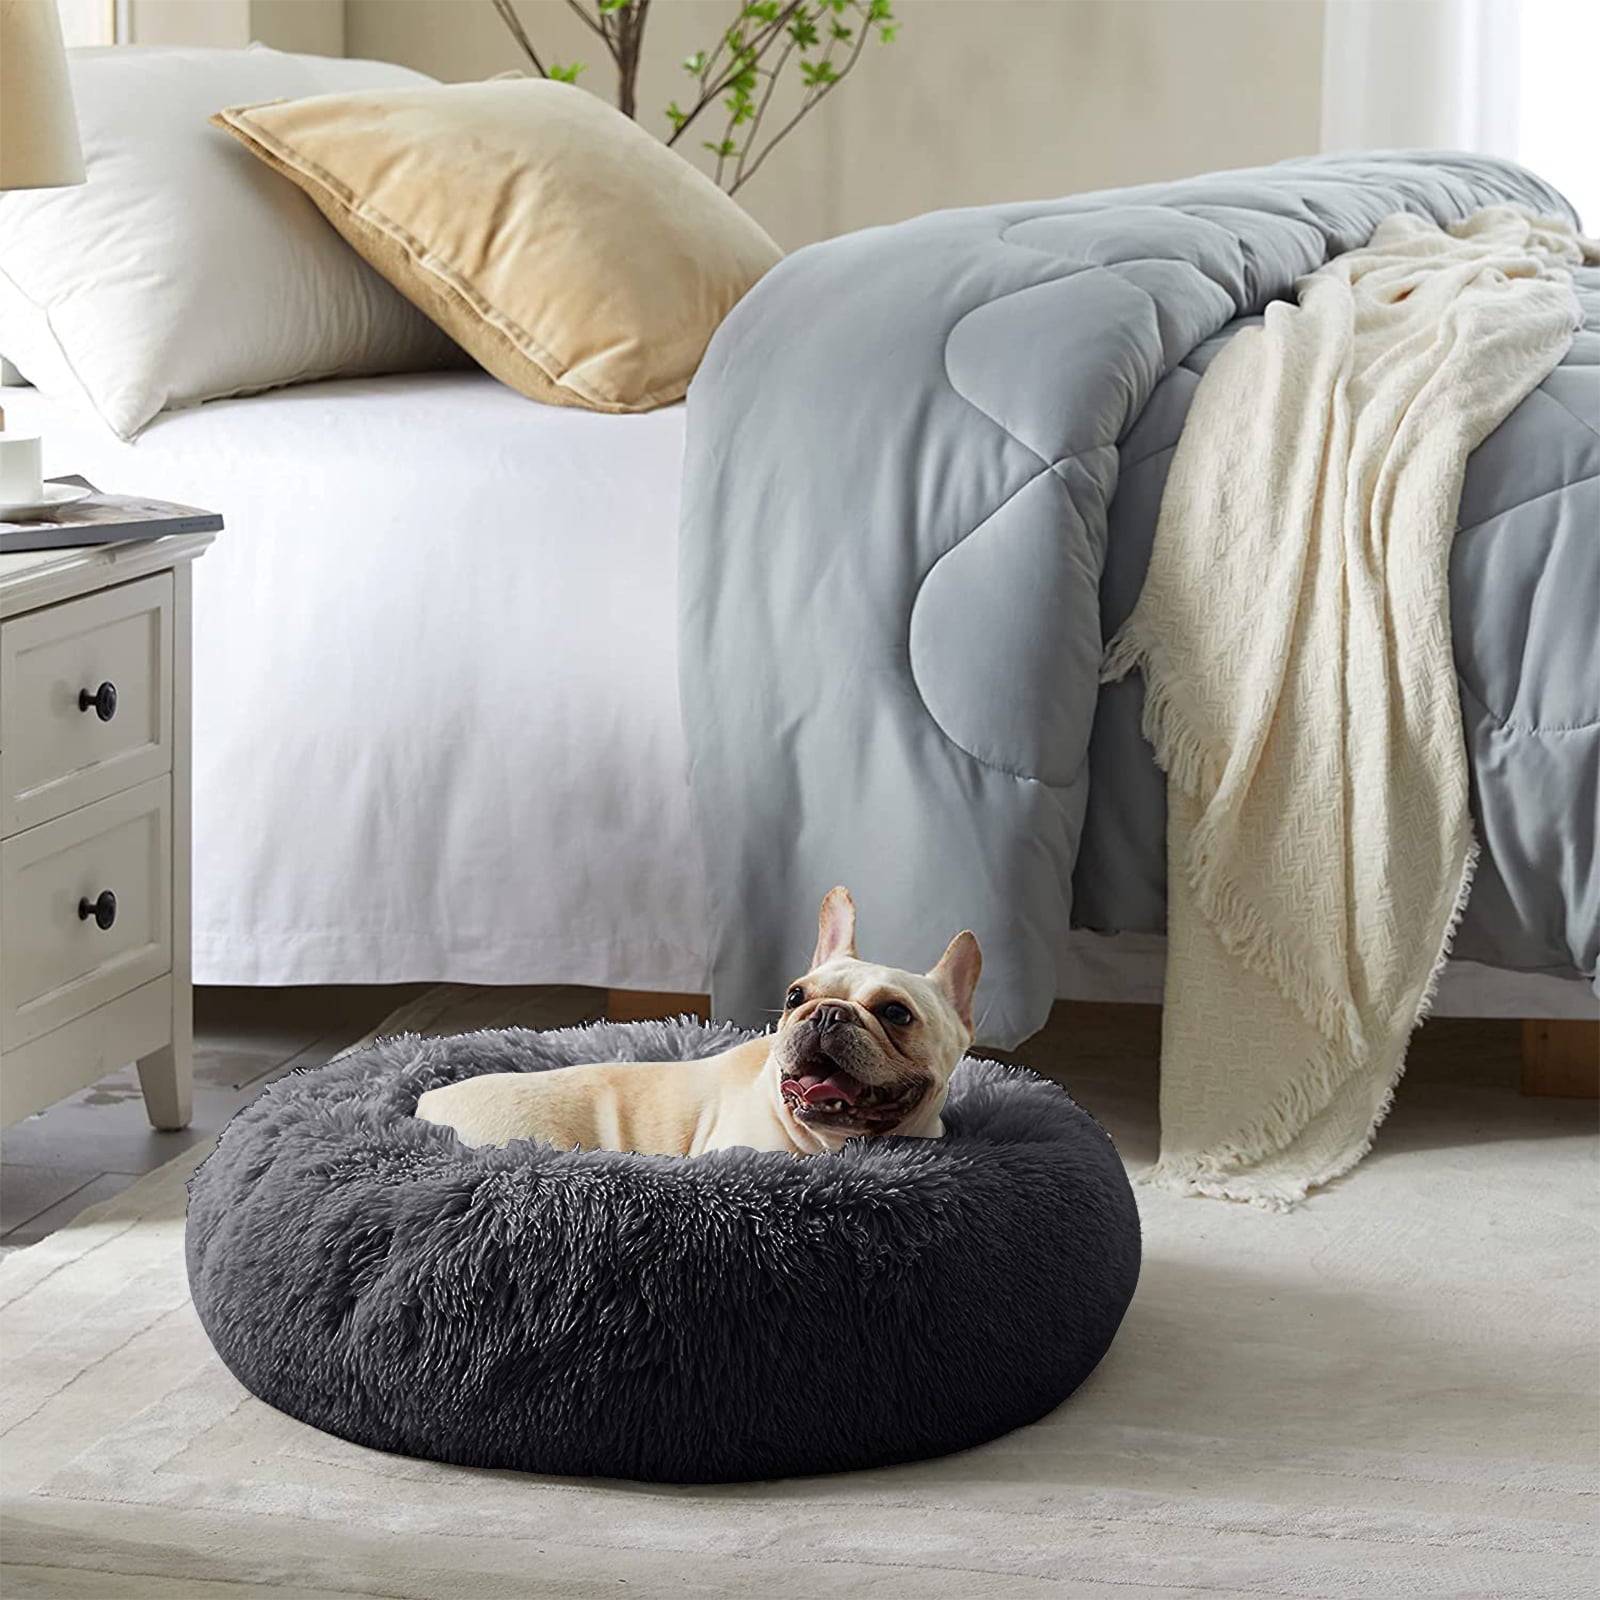 Nisrada Cat Beds for Indoor Cats，20 inch Pet Bed for Small Dogs and Cats， Washable-Round Pet Bed for Puppy and Kitten with Soft Fluffy Warm and Cozy (20 inch， Dark Gray)